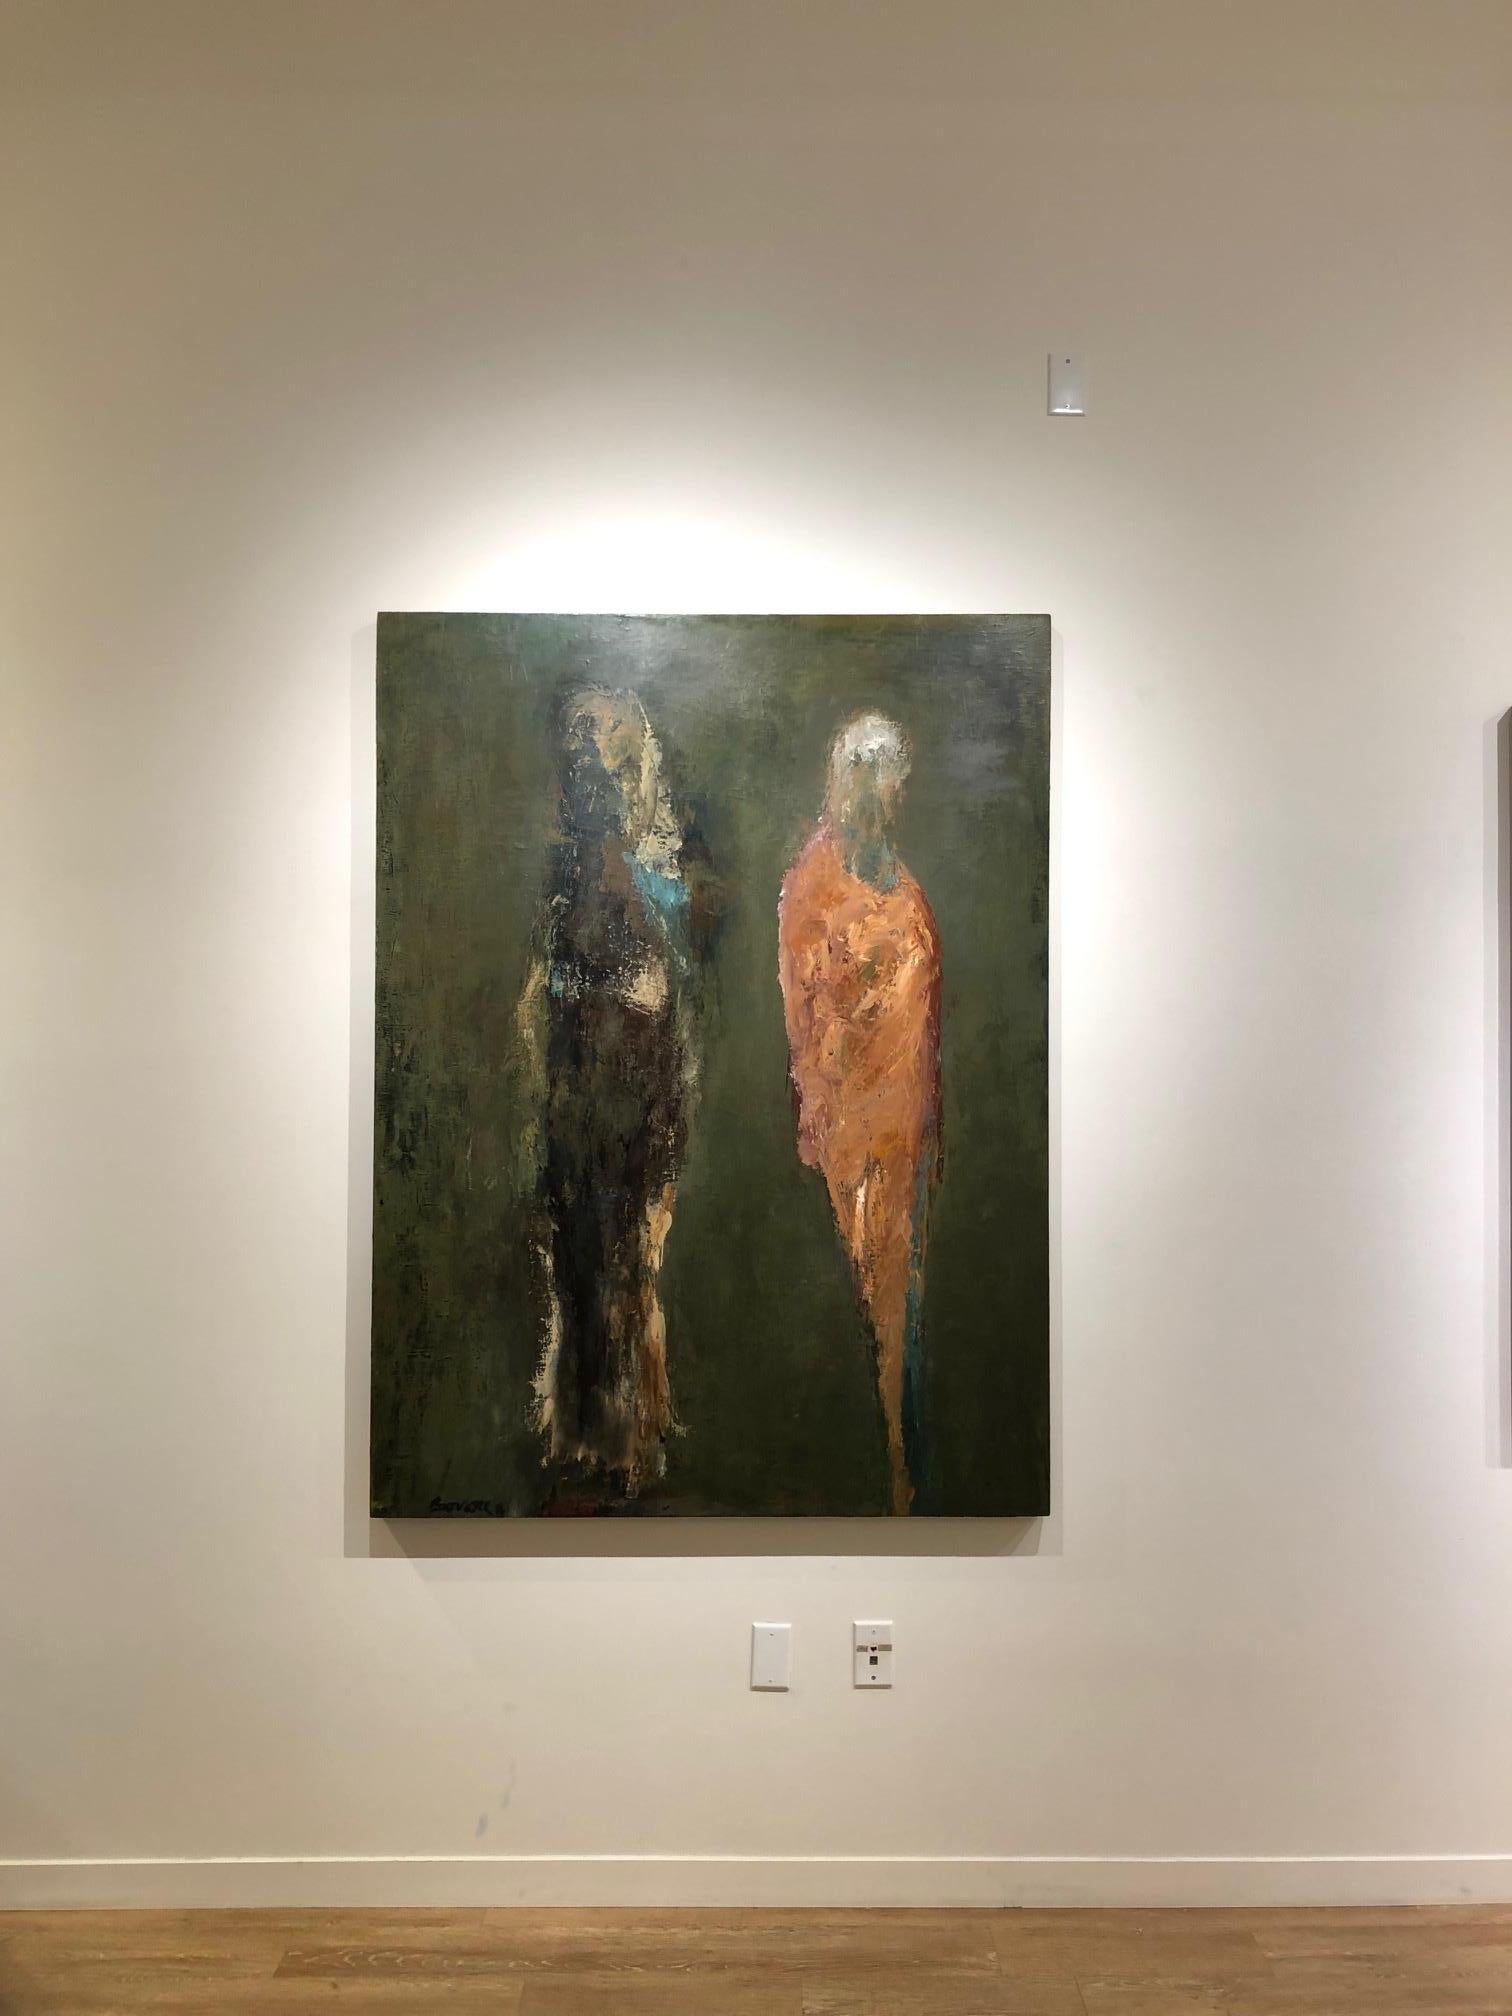 Provocative and haunting figurative work painted in olive green with gold and touches of black with ivory, from artist Roy Borrone, who is associated with the California Bay Area figurative movement. Rich in feel, with the haunting elegance that is